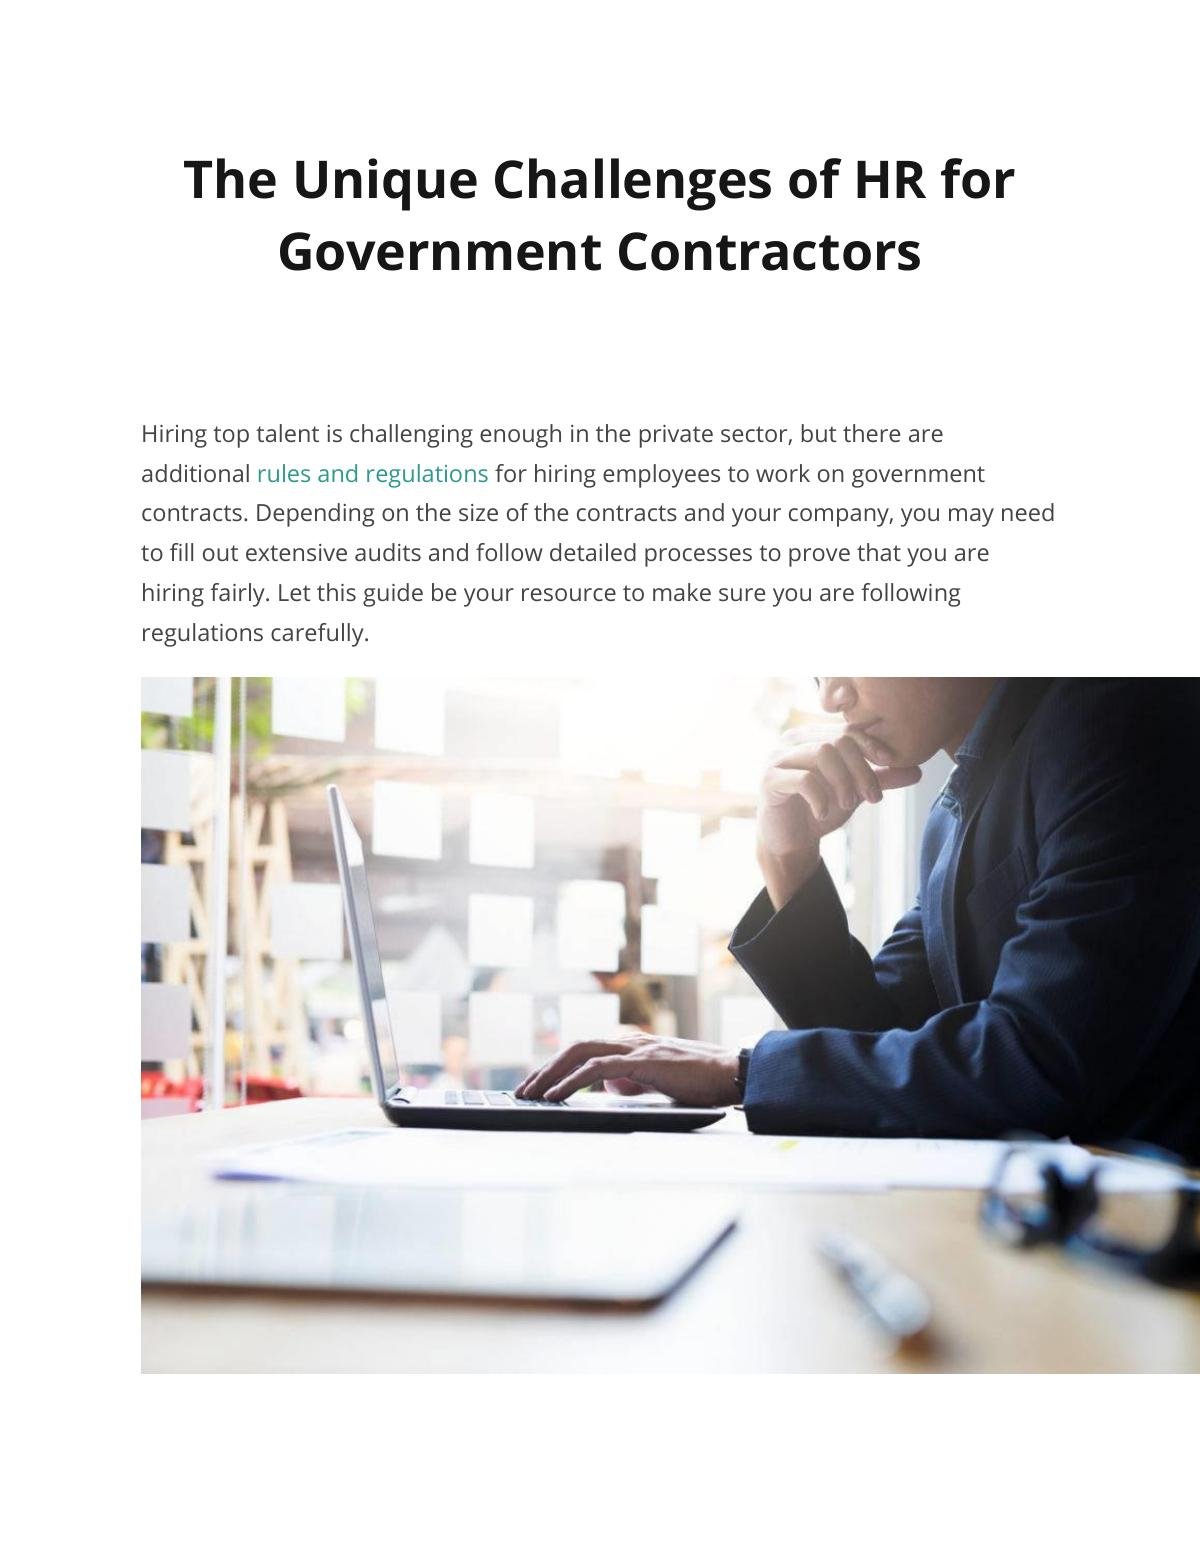 The Unique Challenges of HR for Government Contractors 